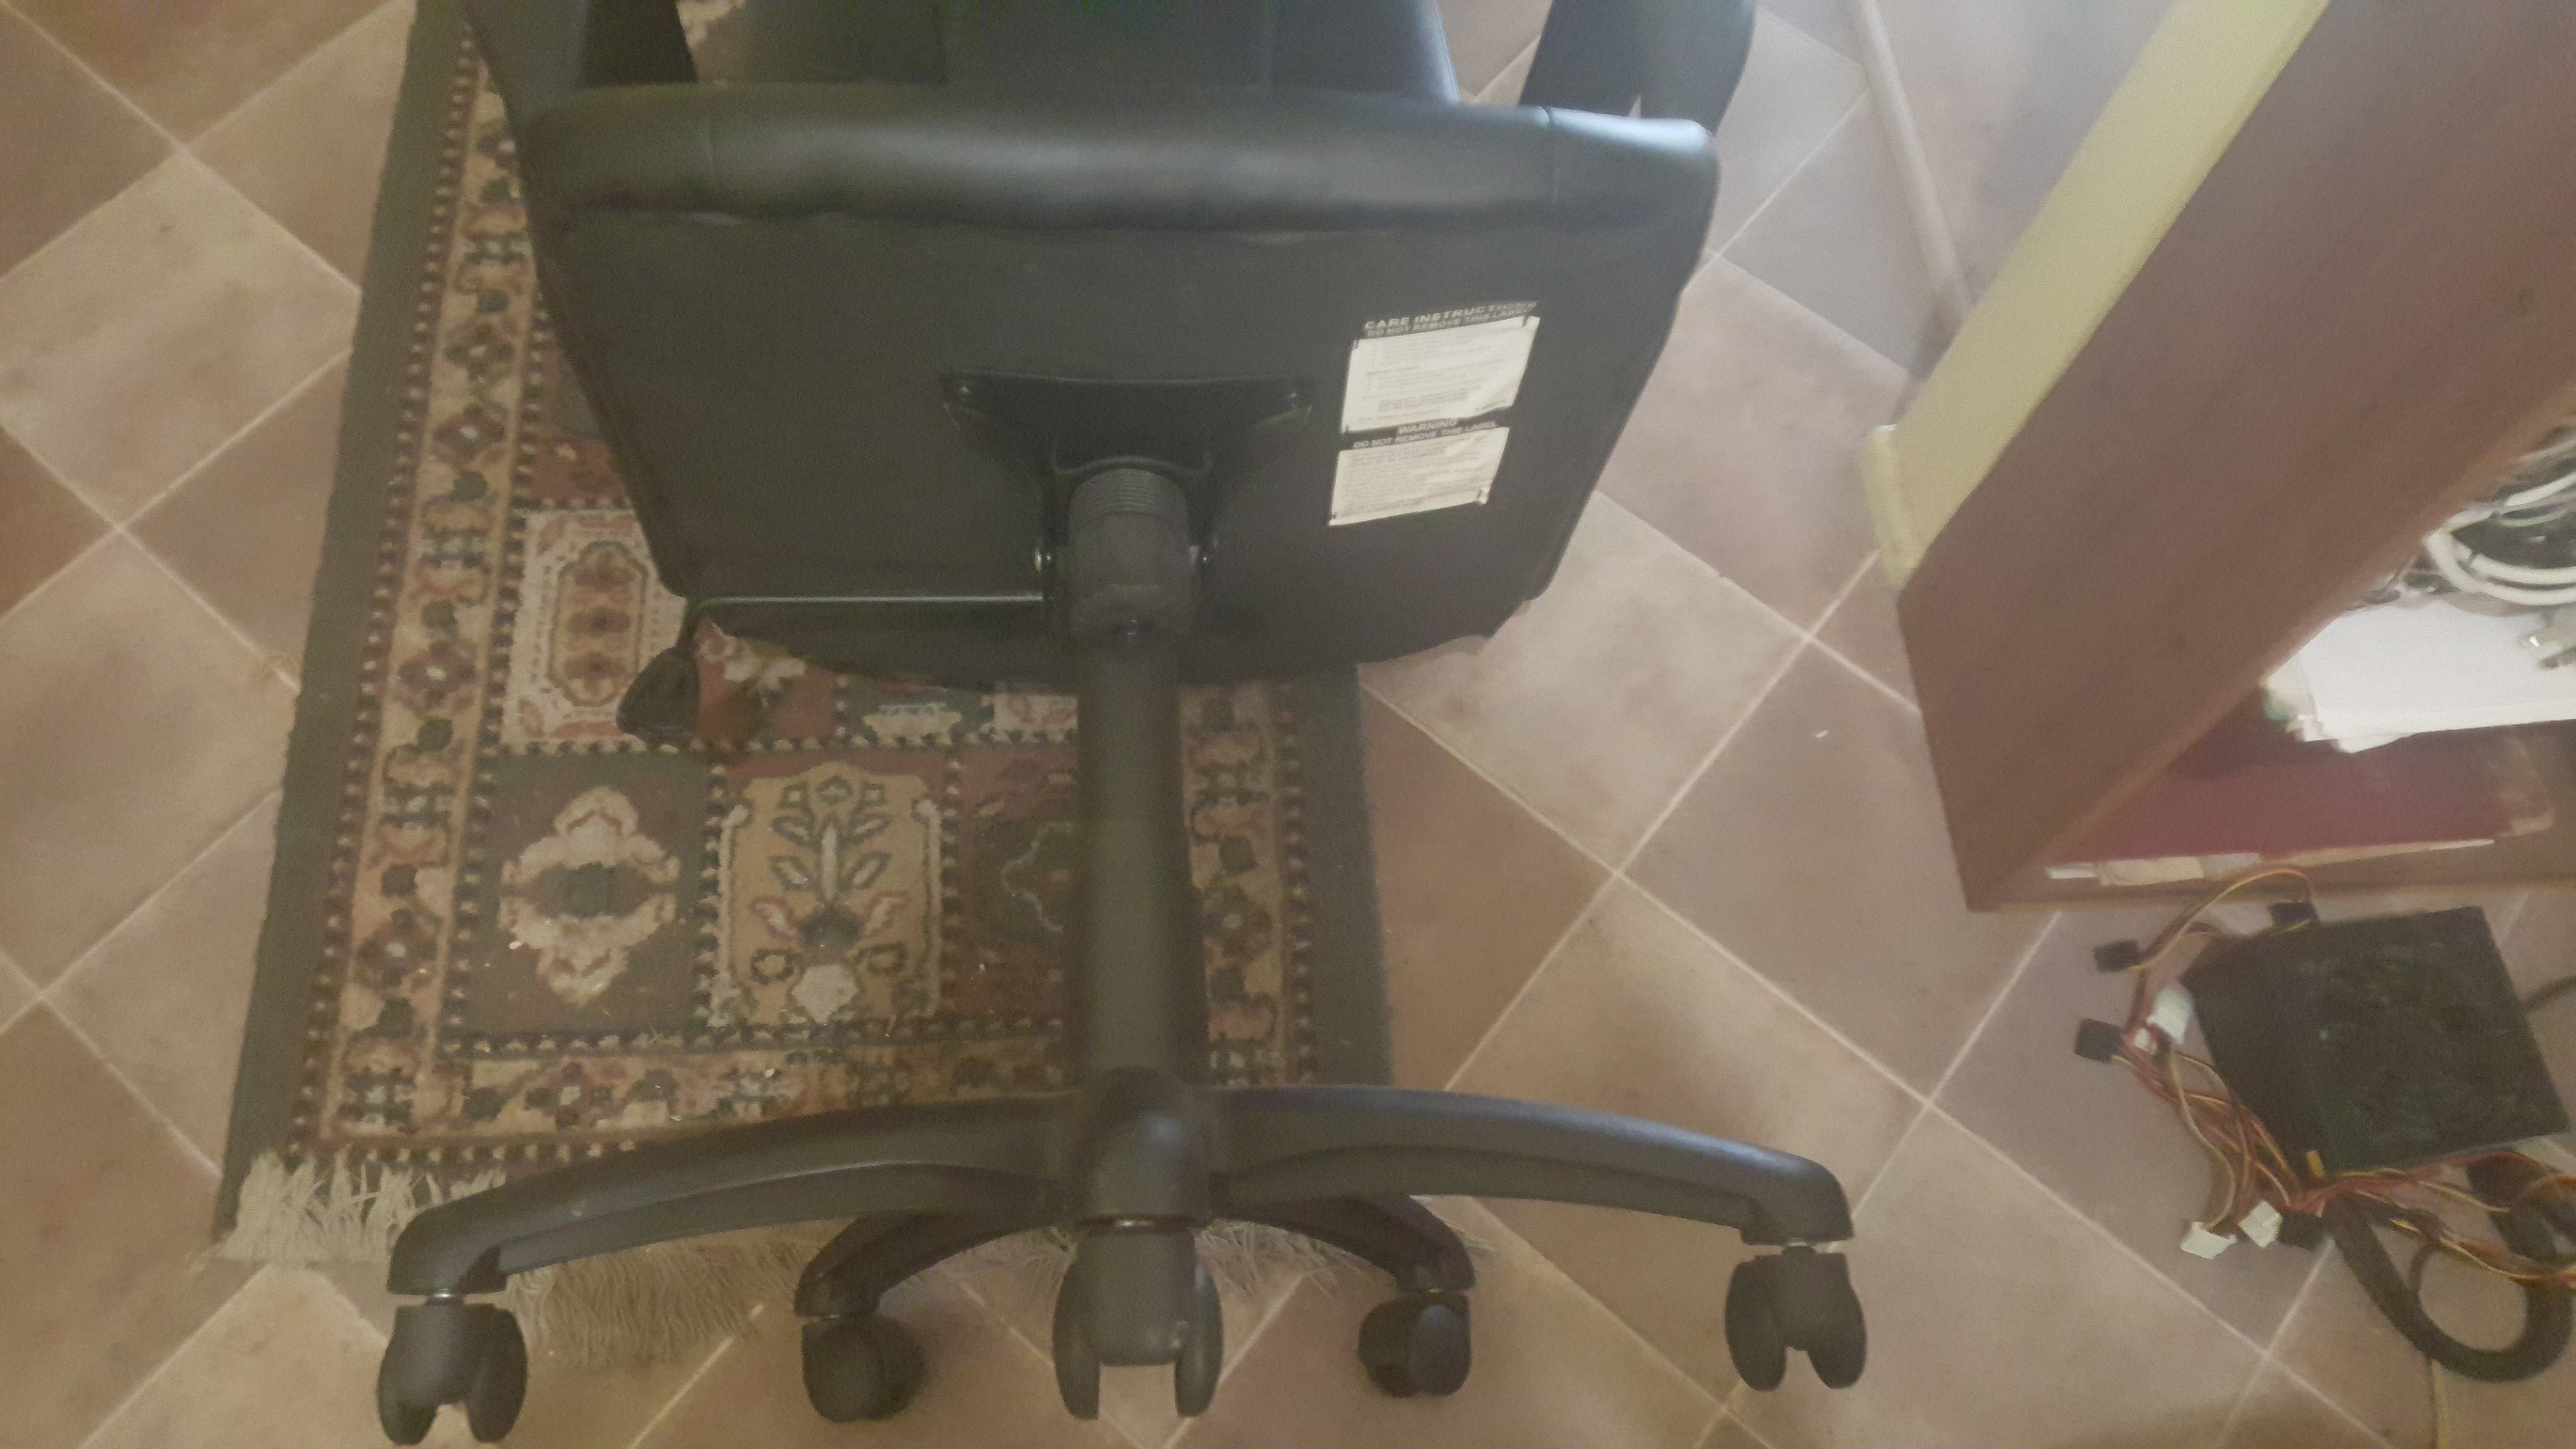 Archer Home Office Chair New Condition